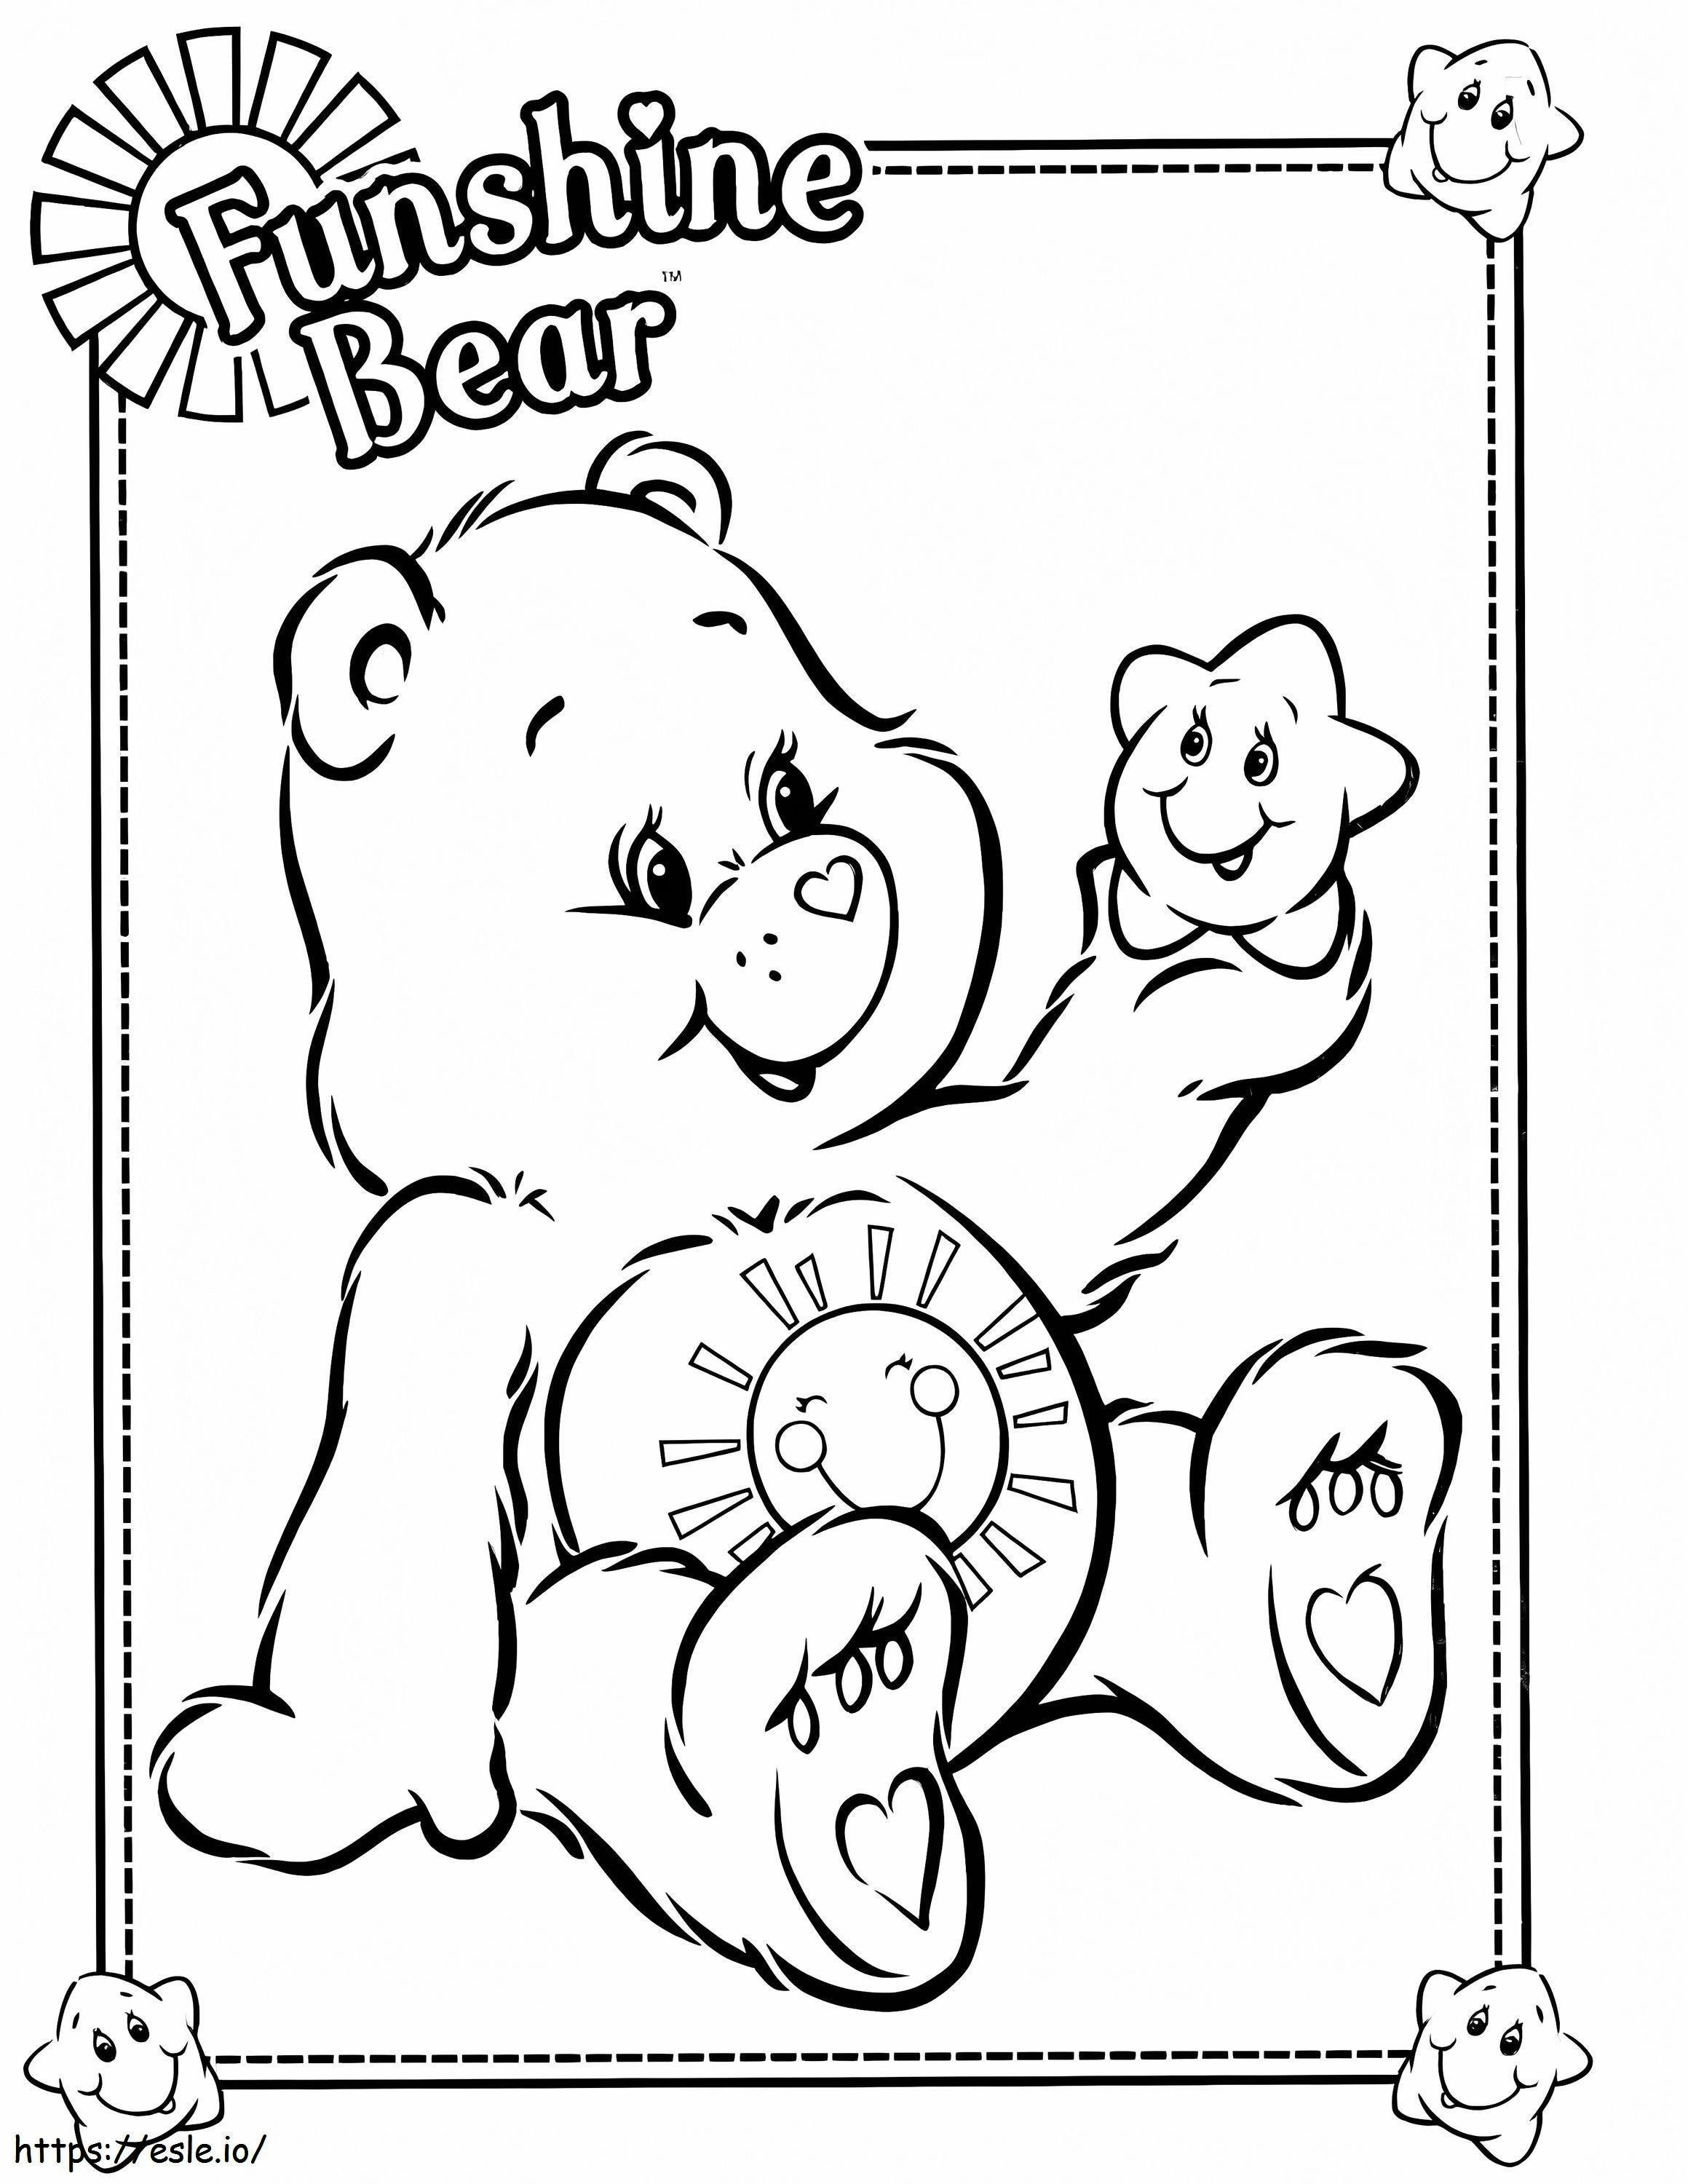 Funny Bear coloring page